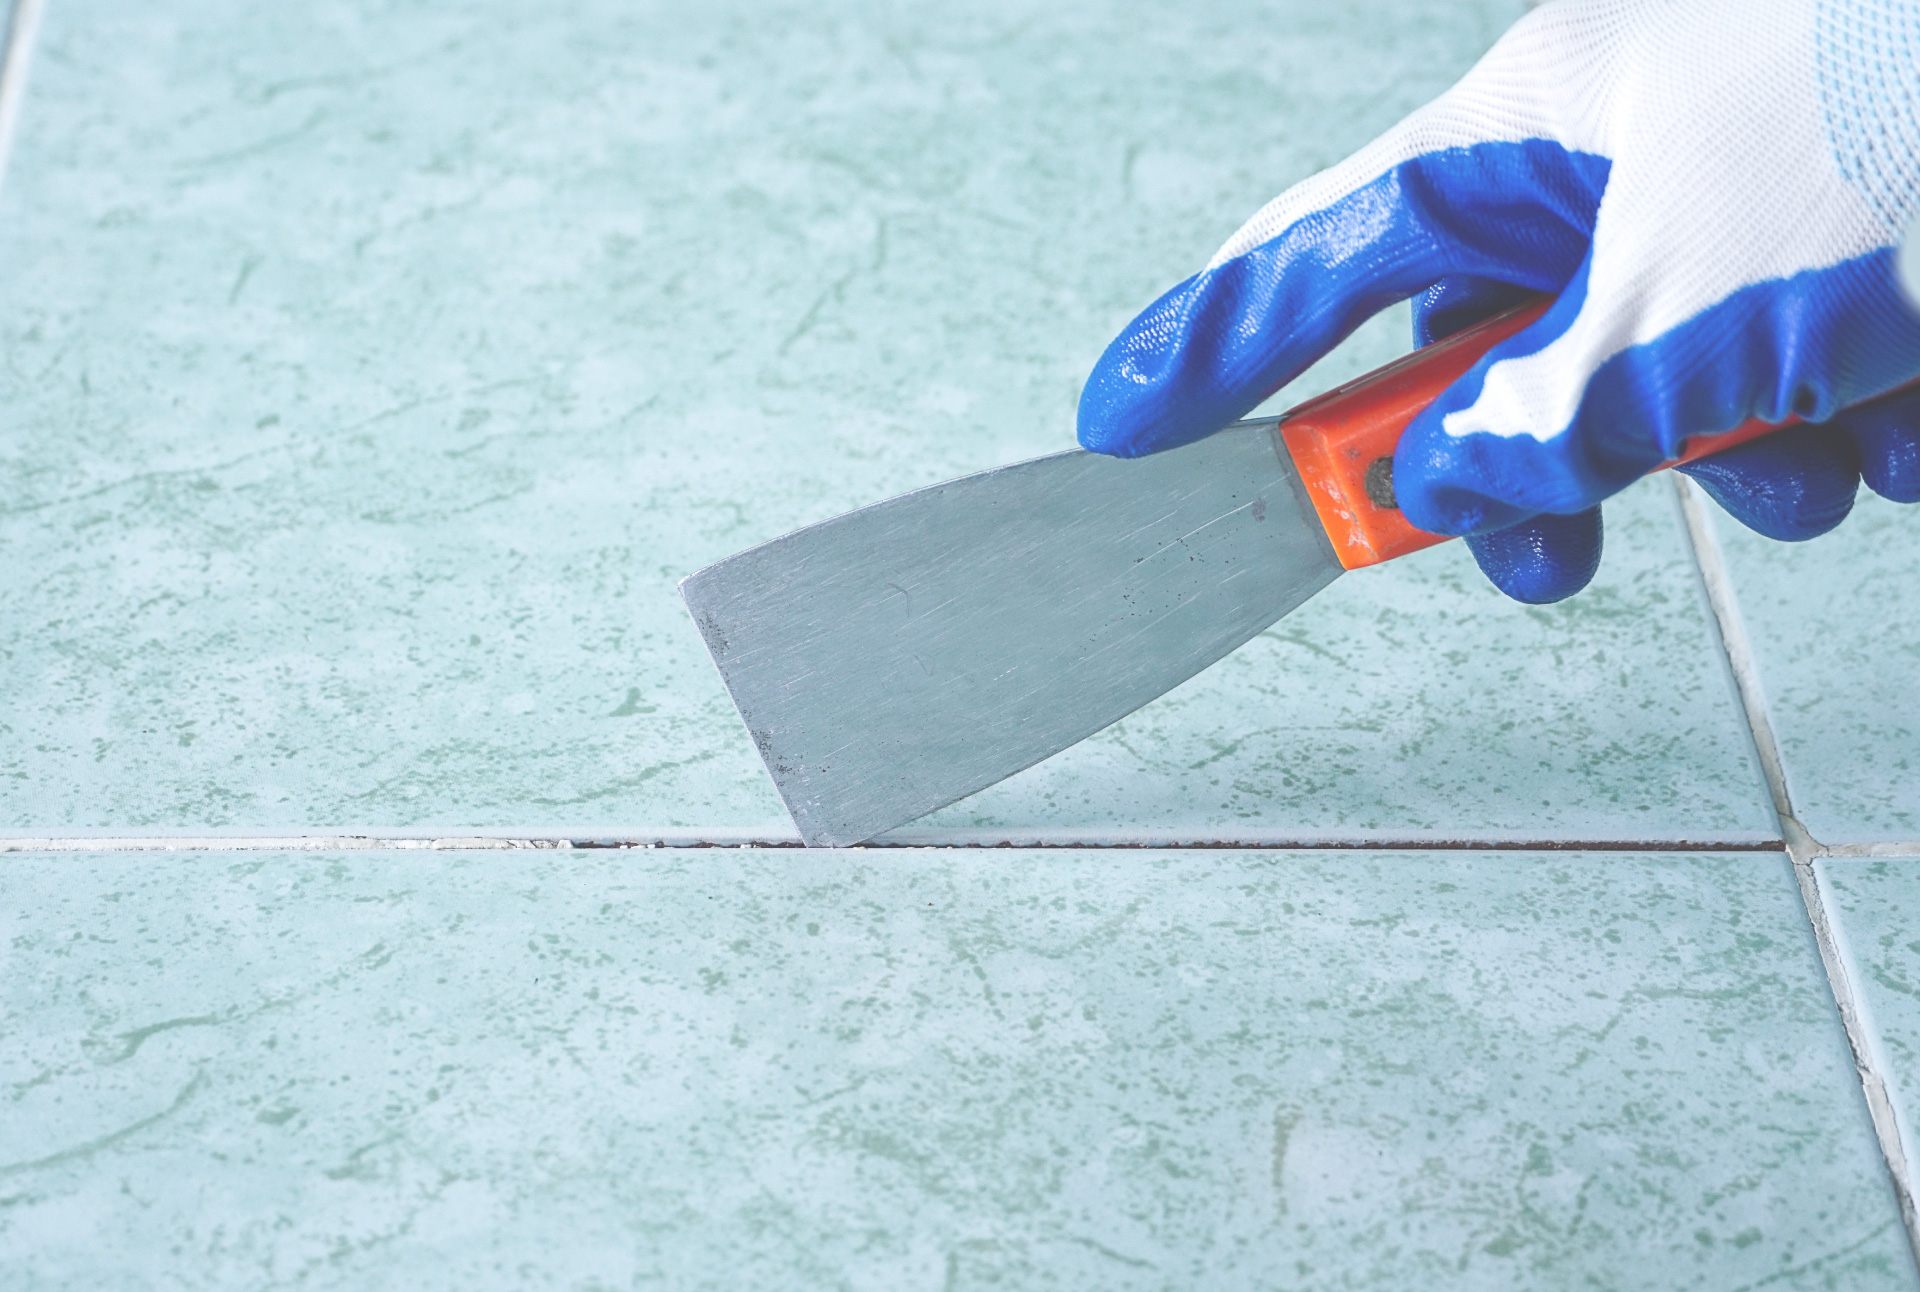 Remove Grout Without Damaging the Tile